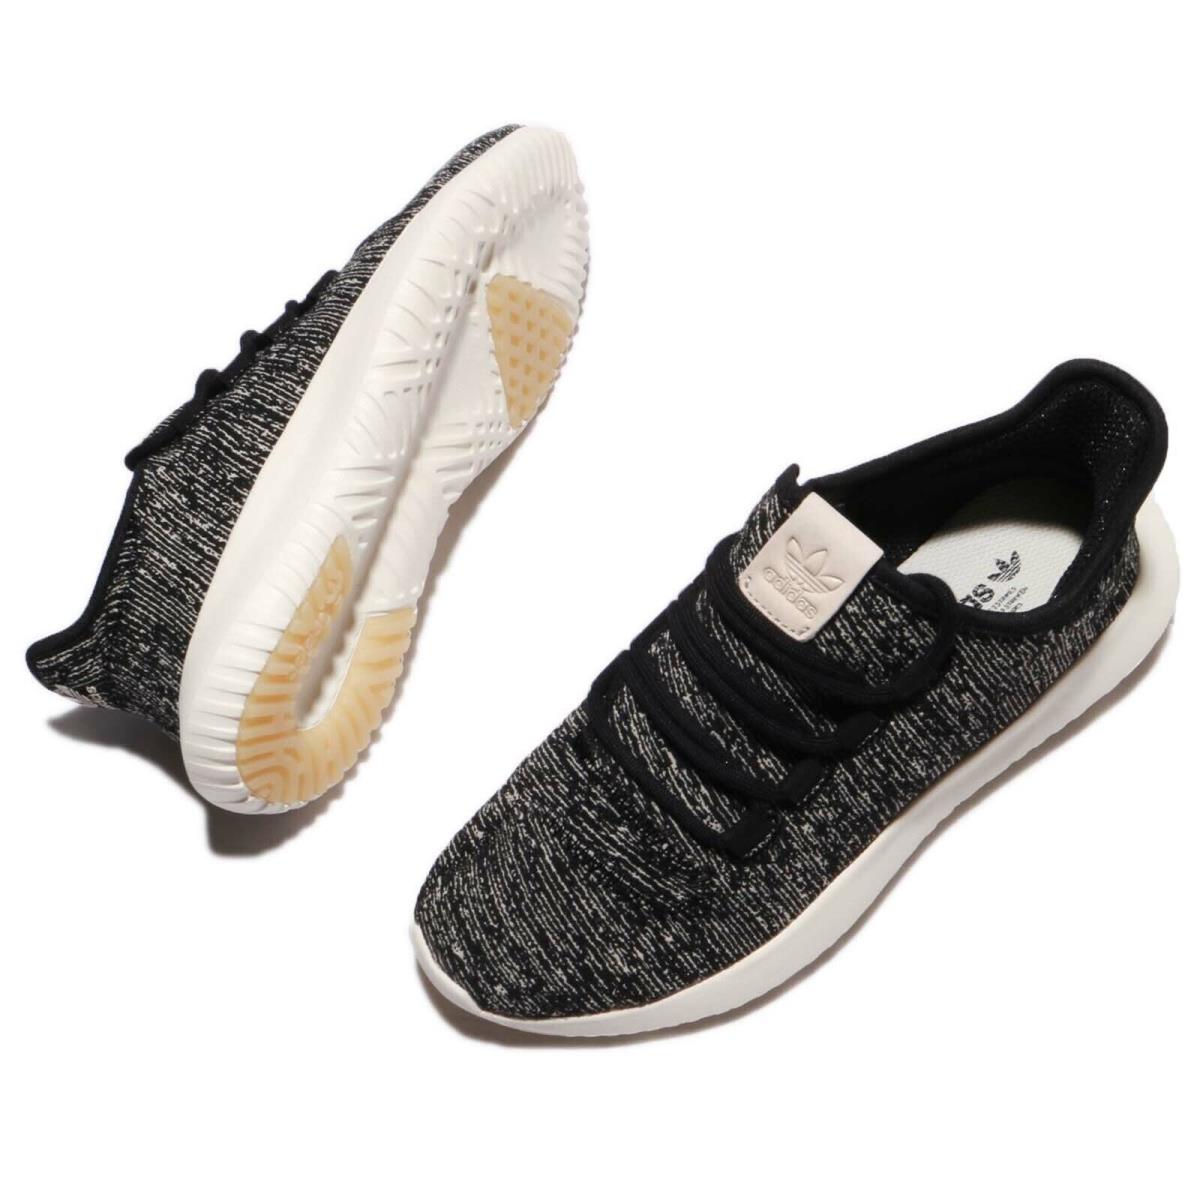 Adidas shoes tubular shadow - Black/Clear Brown/Off White 1